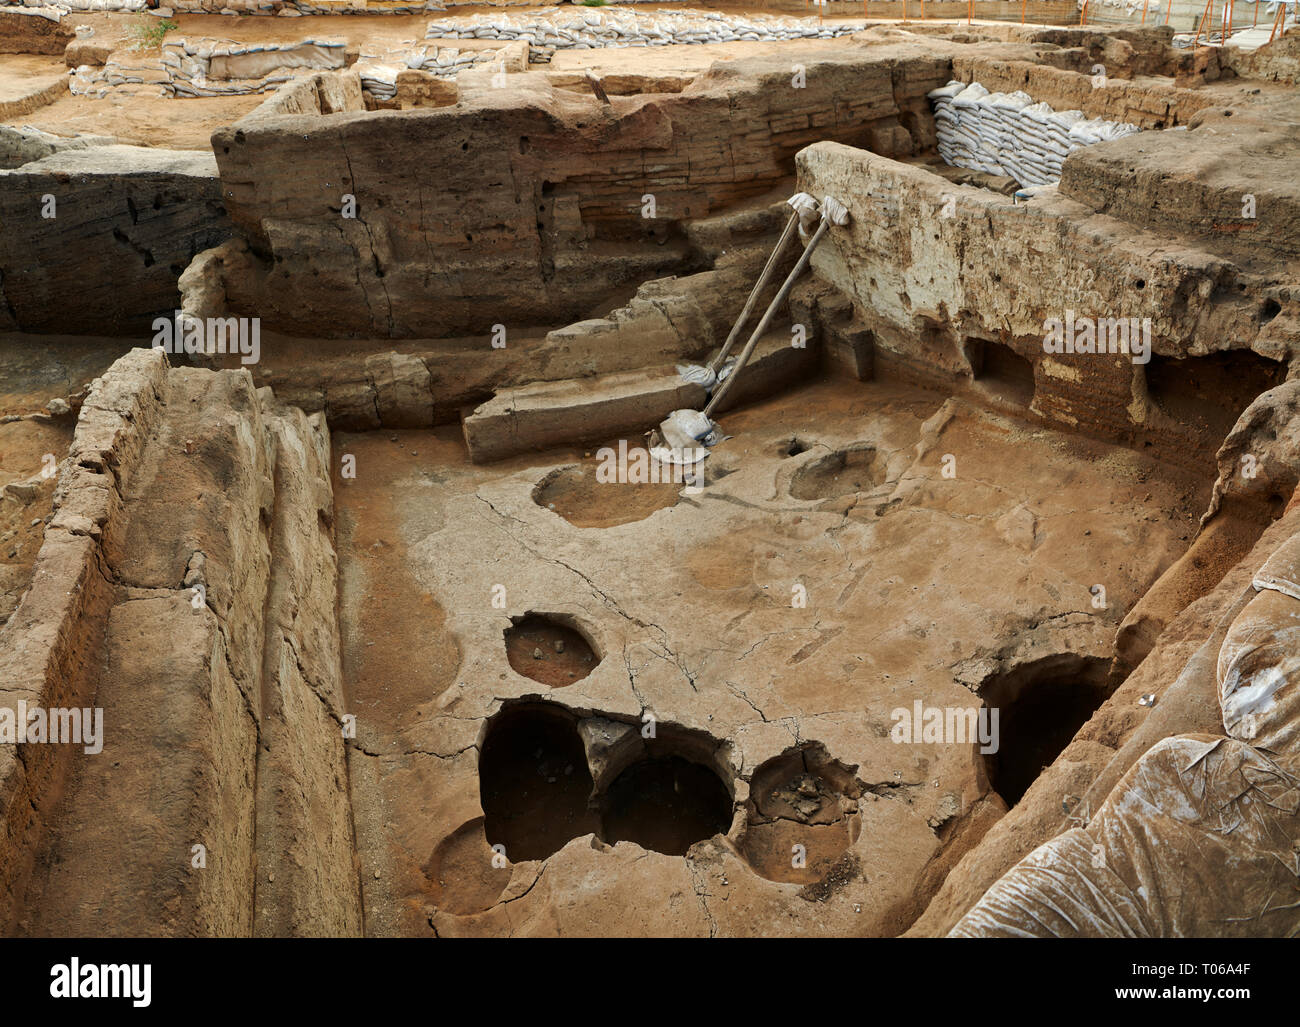 Building 321. Empty burial pit in the floor of the Neolithic remains of mud brick house. In the top right is a darker area which was the midden or ref Stock Photo